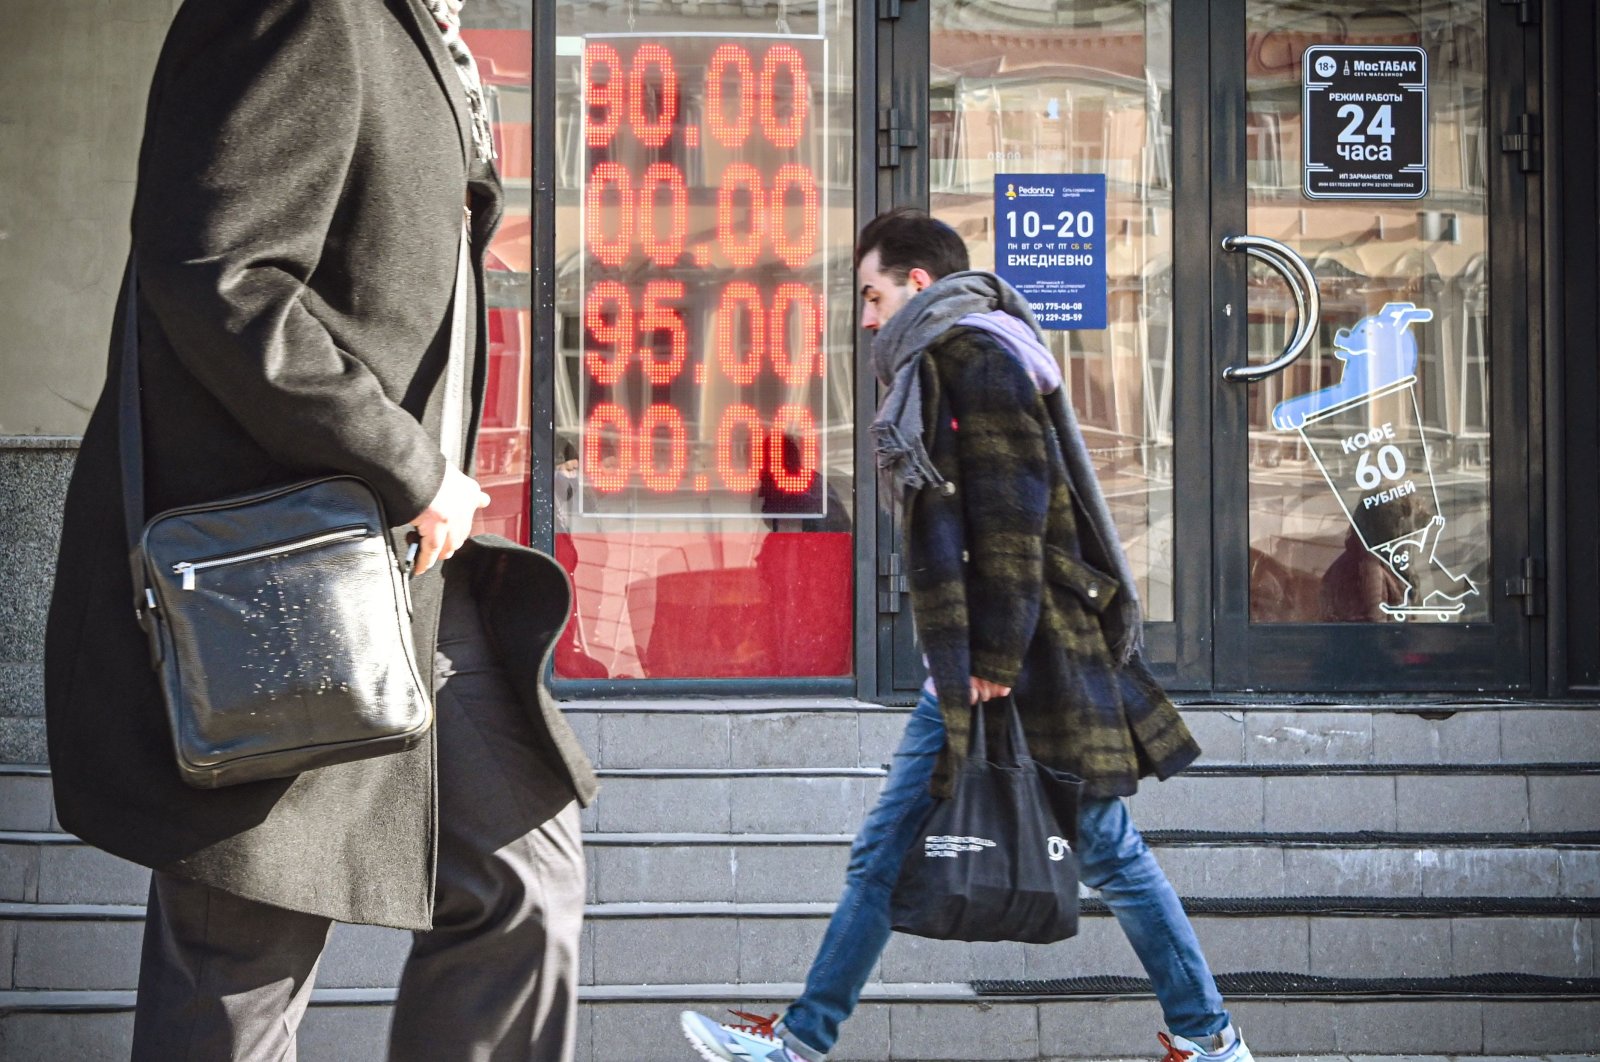 People walk past a currency exchange office, with zeros on the scoreboard since there are no three-digit sections on it to display the current exchange rate, in central Moscow, Russia, Feb. 28, 2022. (AFP Photo)